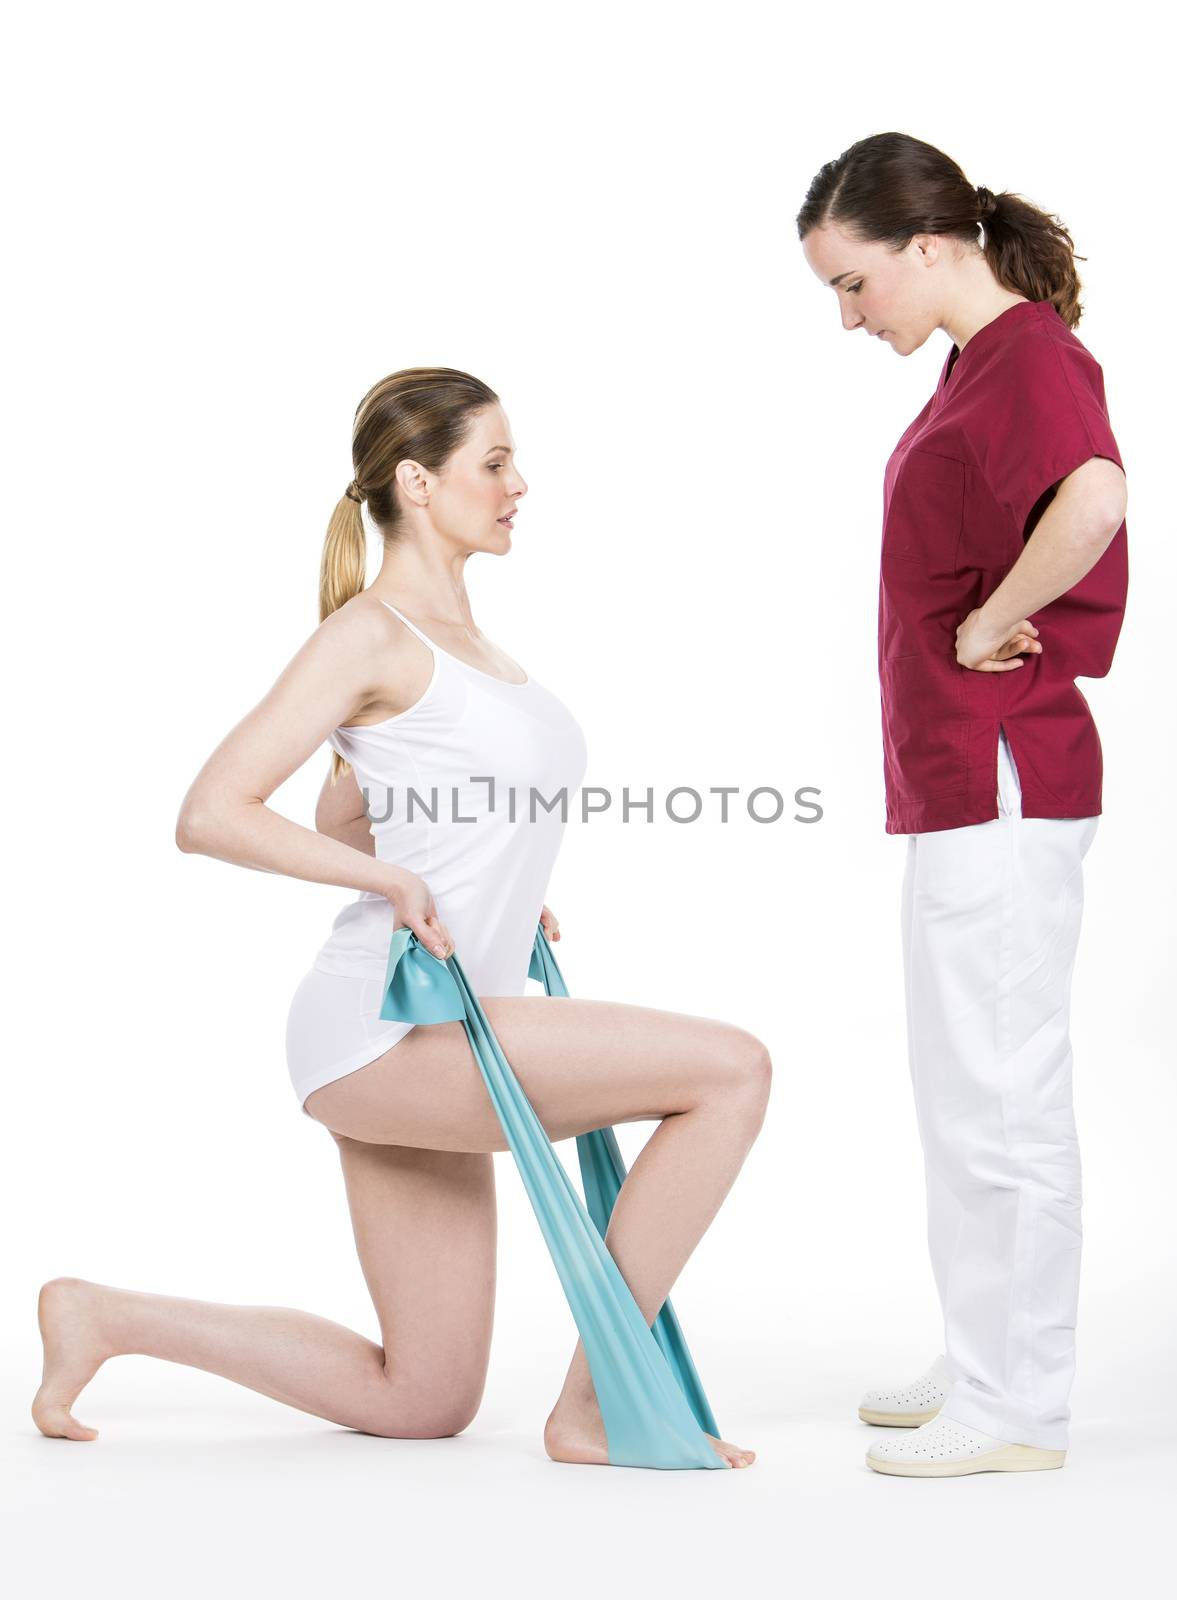 
Physiotherapist doing tone with flexible for spine